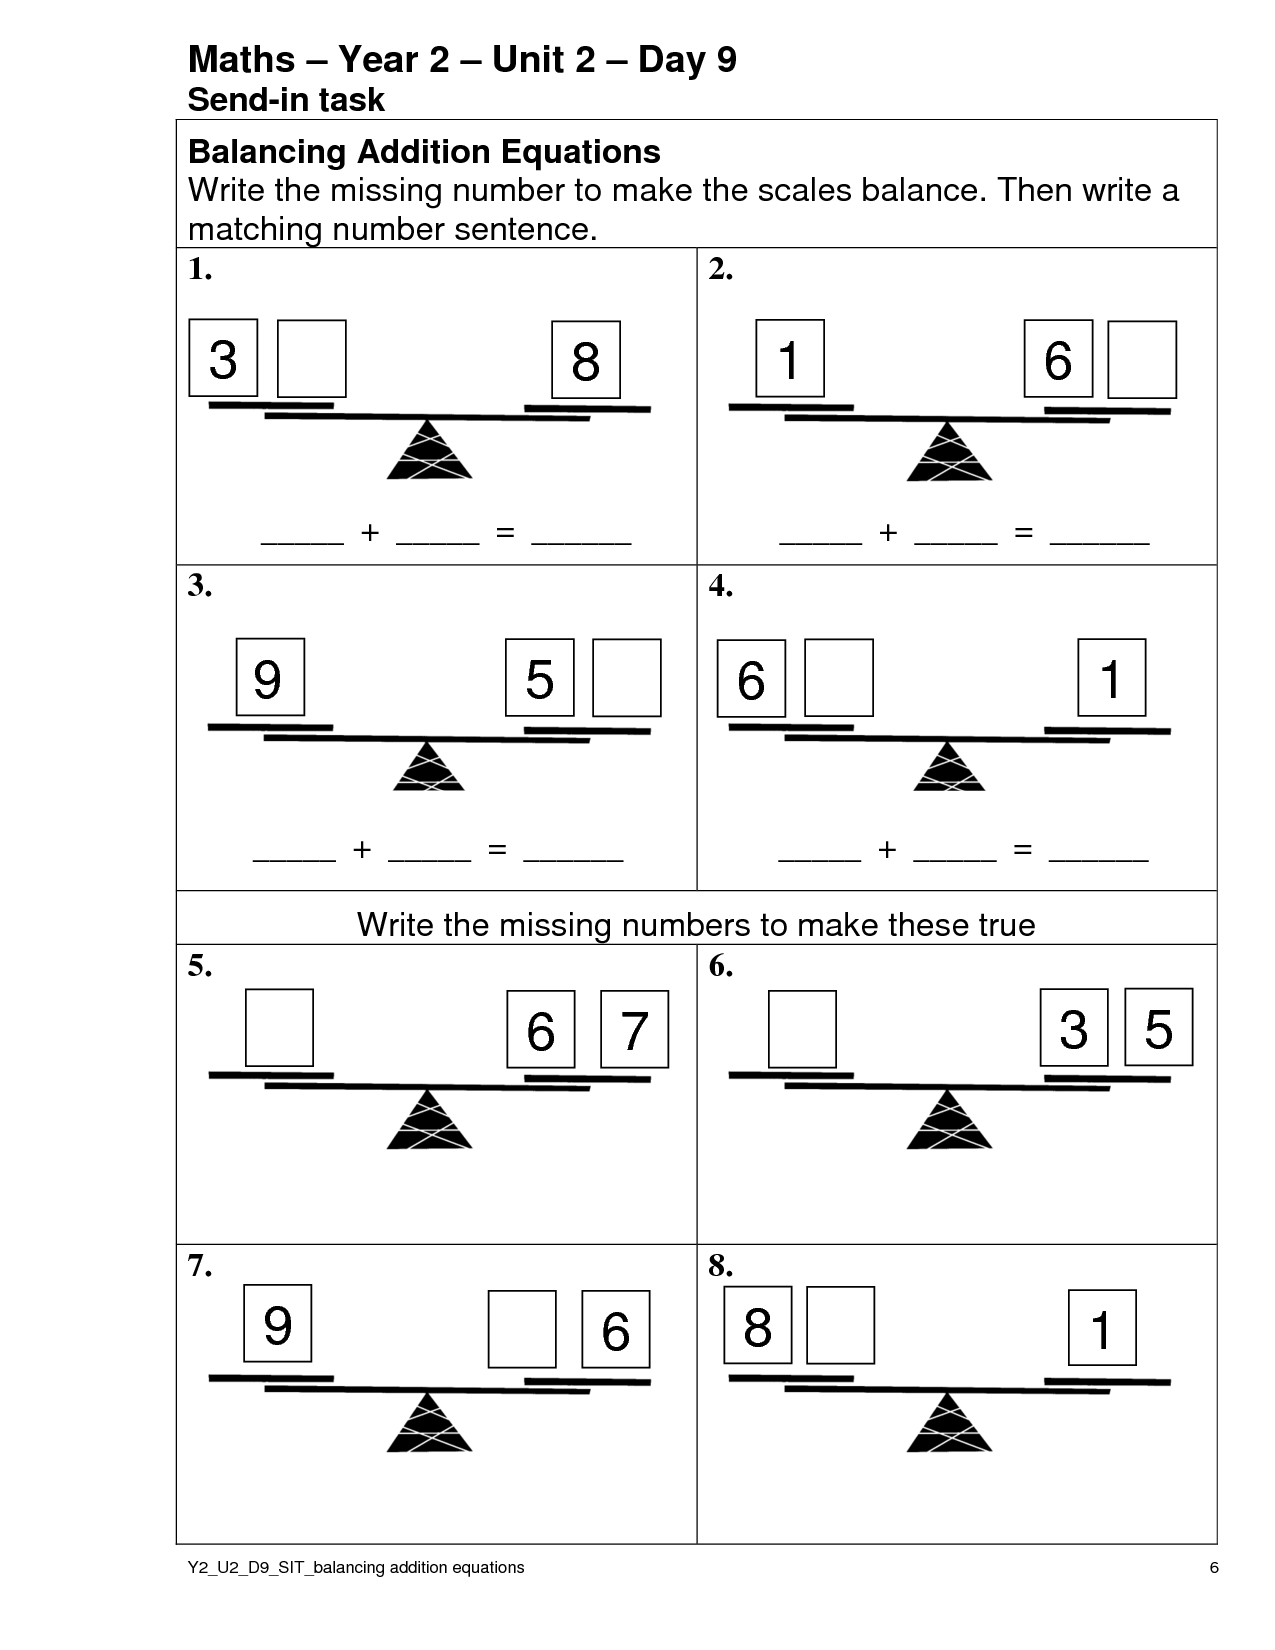 balancing-equations-equivalent-number-sentence-challenge-sheets-from-mrs-urbina-s-classroom